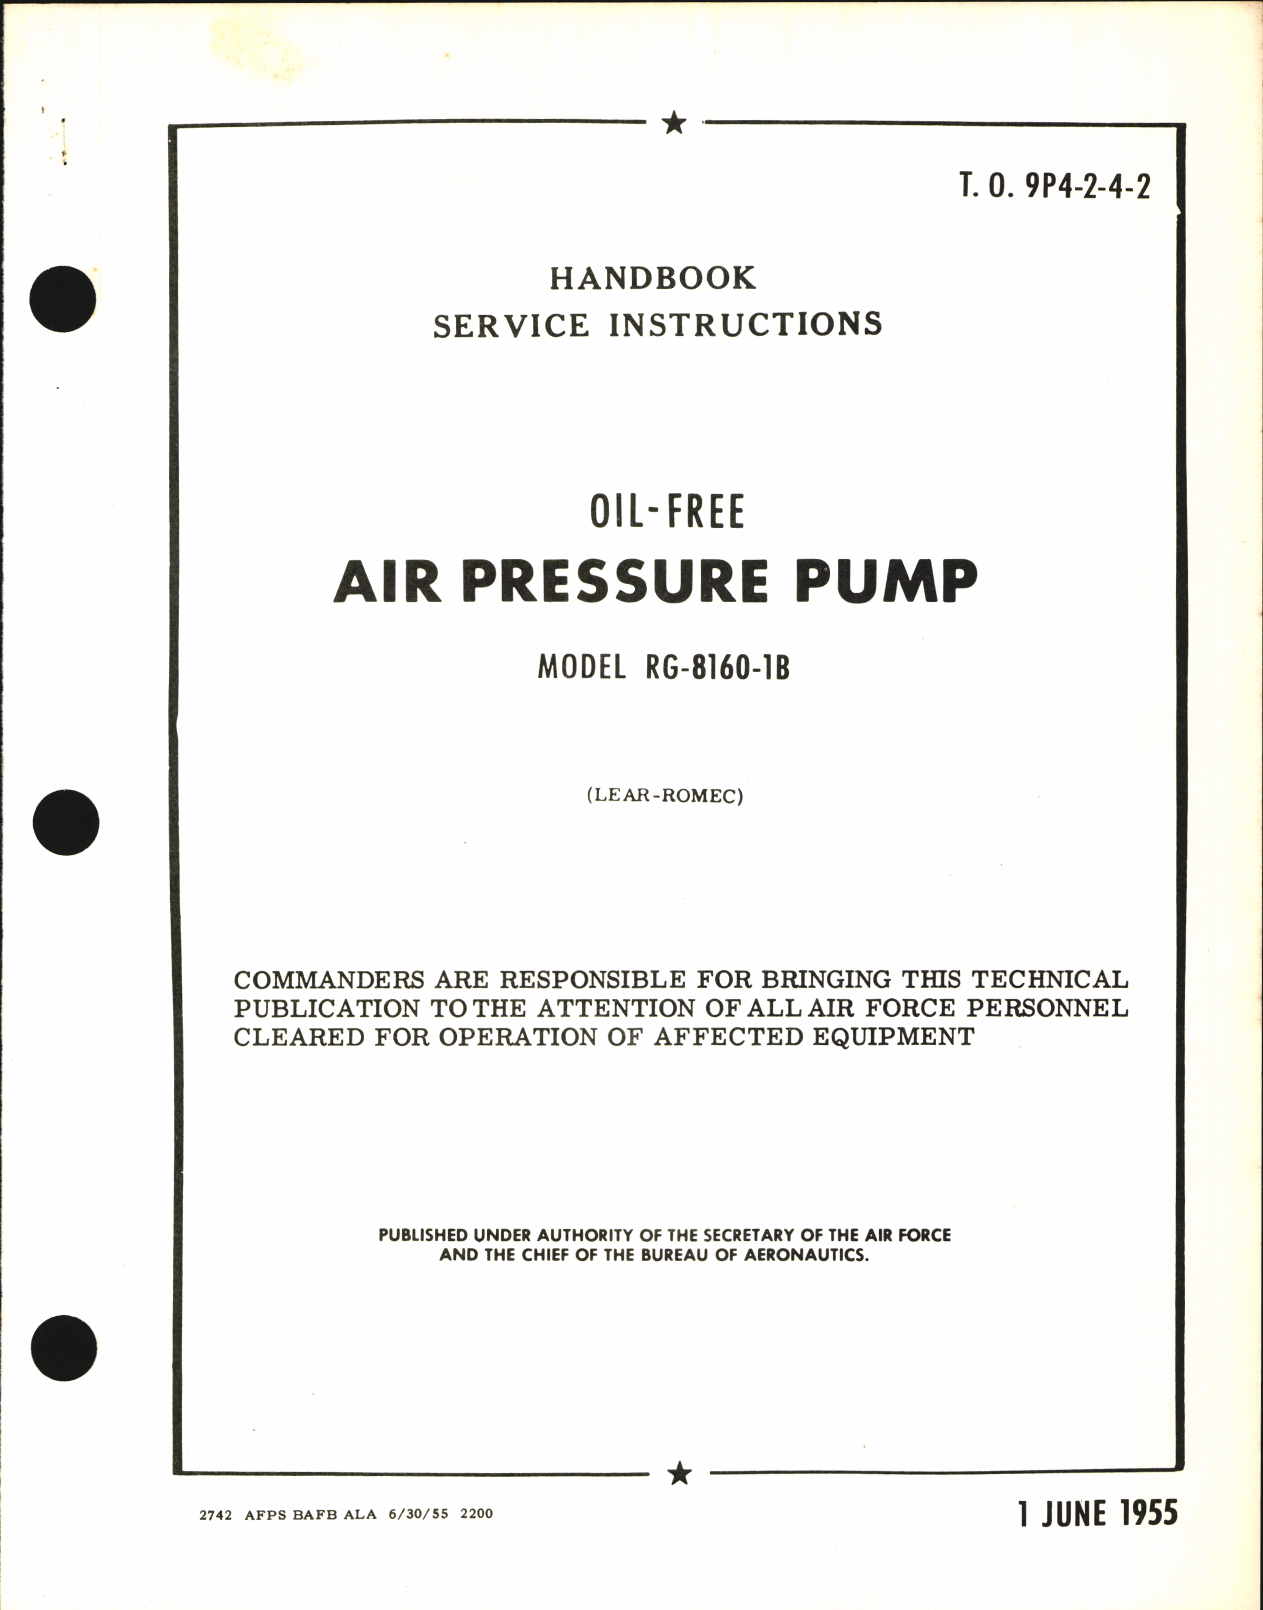 Sample page 1 from AirCorps Library document: Handbook of Service Instructions for Oil-Free Air Pressure Pump Model RG-8160-1B